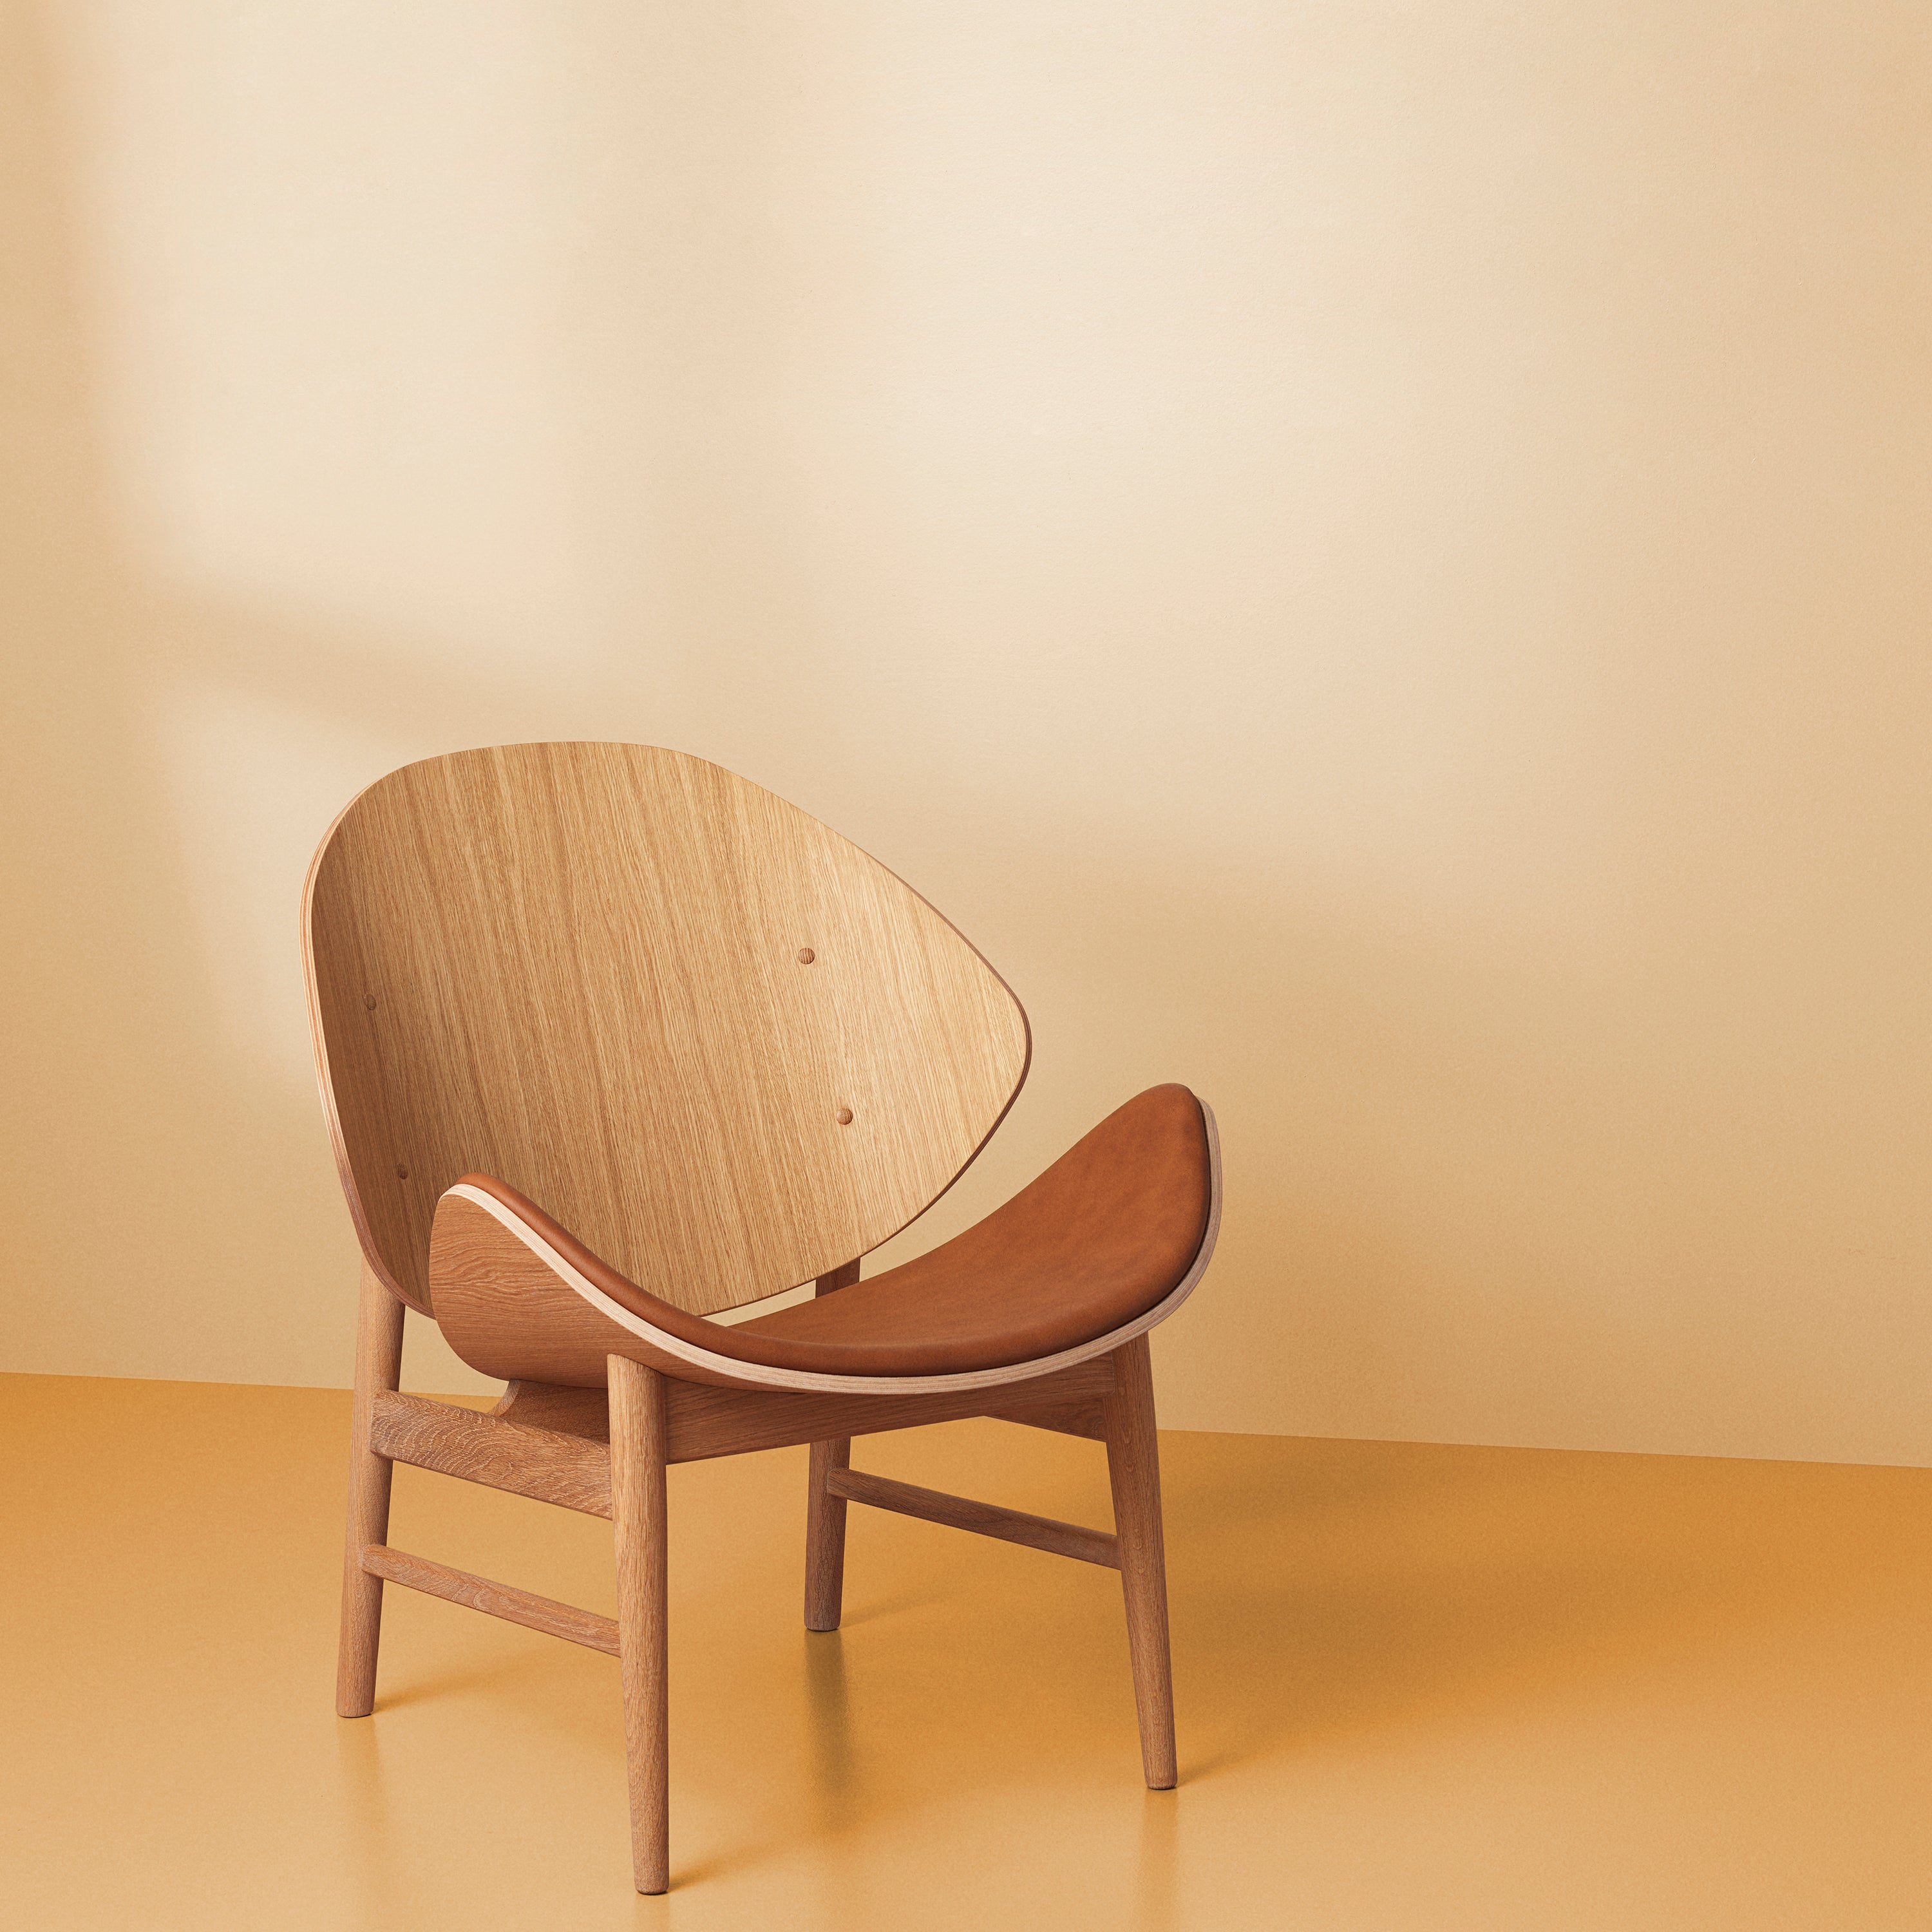 The Orange Lounge Chair: Seat Upholstered